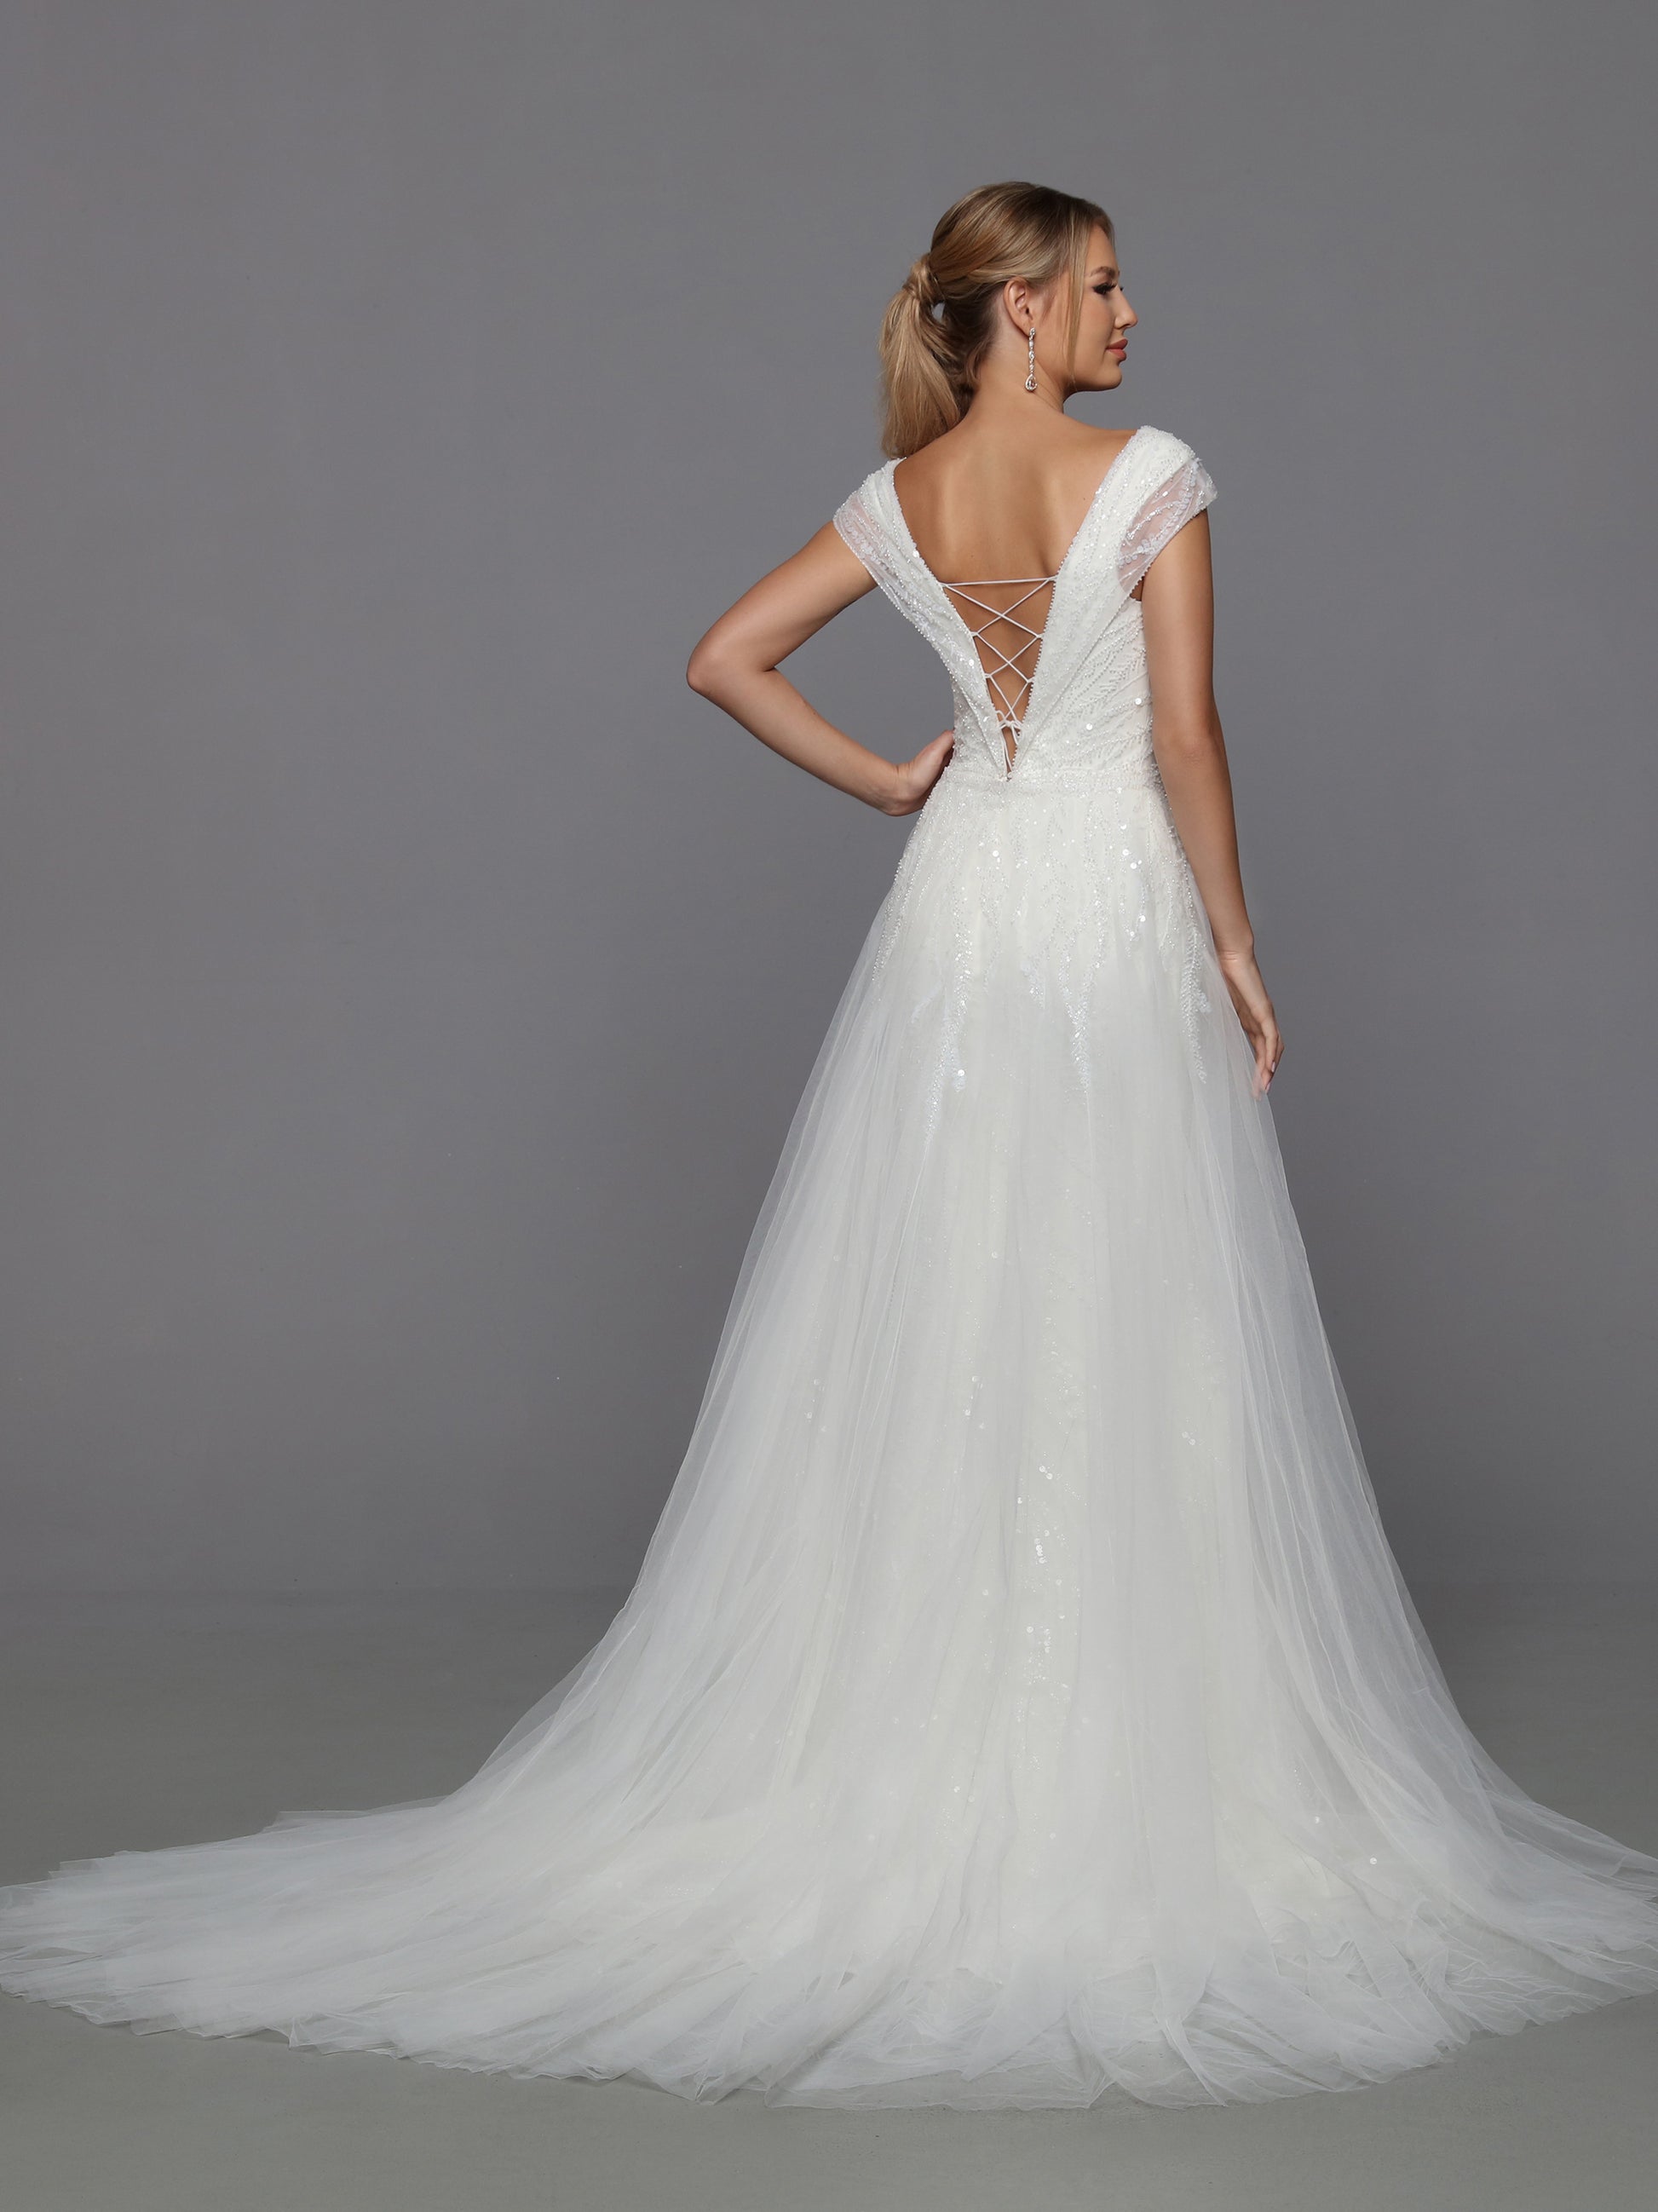 Davinci Bridal 50762 Long fitted Beaded Sequin Mermaid Bridal Gown with detachable  Overskirt off the Shoulder Cap sleeves and a corset lace up back.  Sizes: Ivory  Colors: 0-28